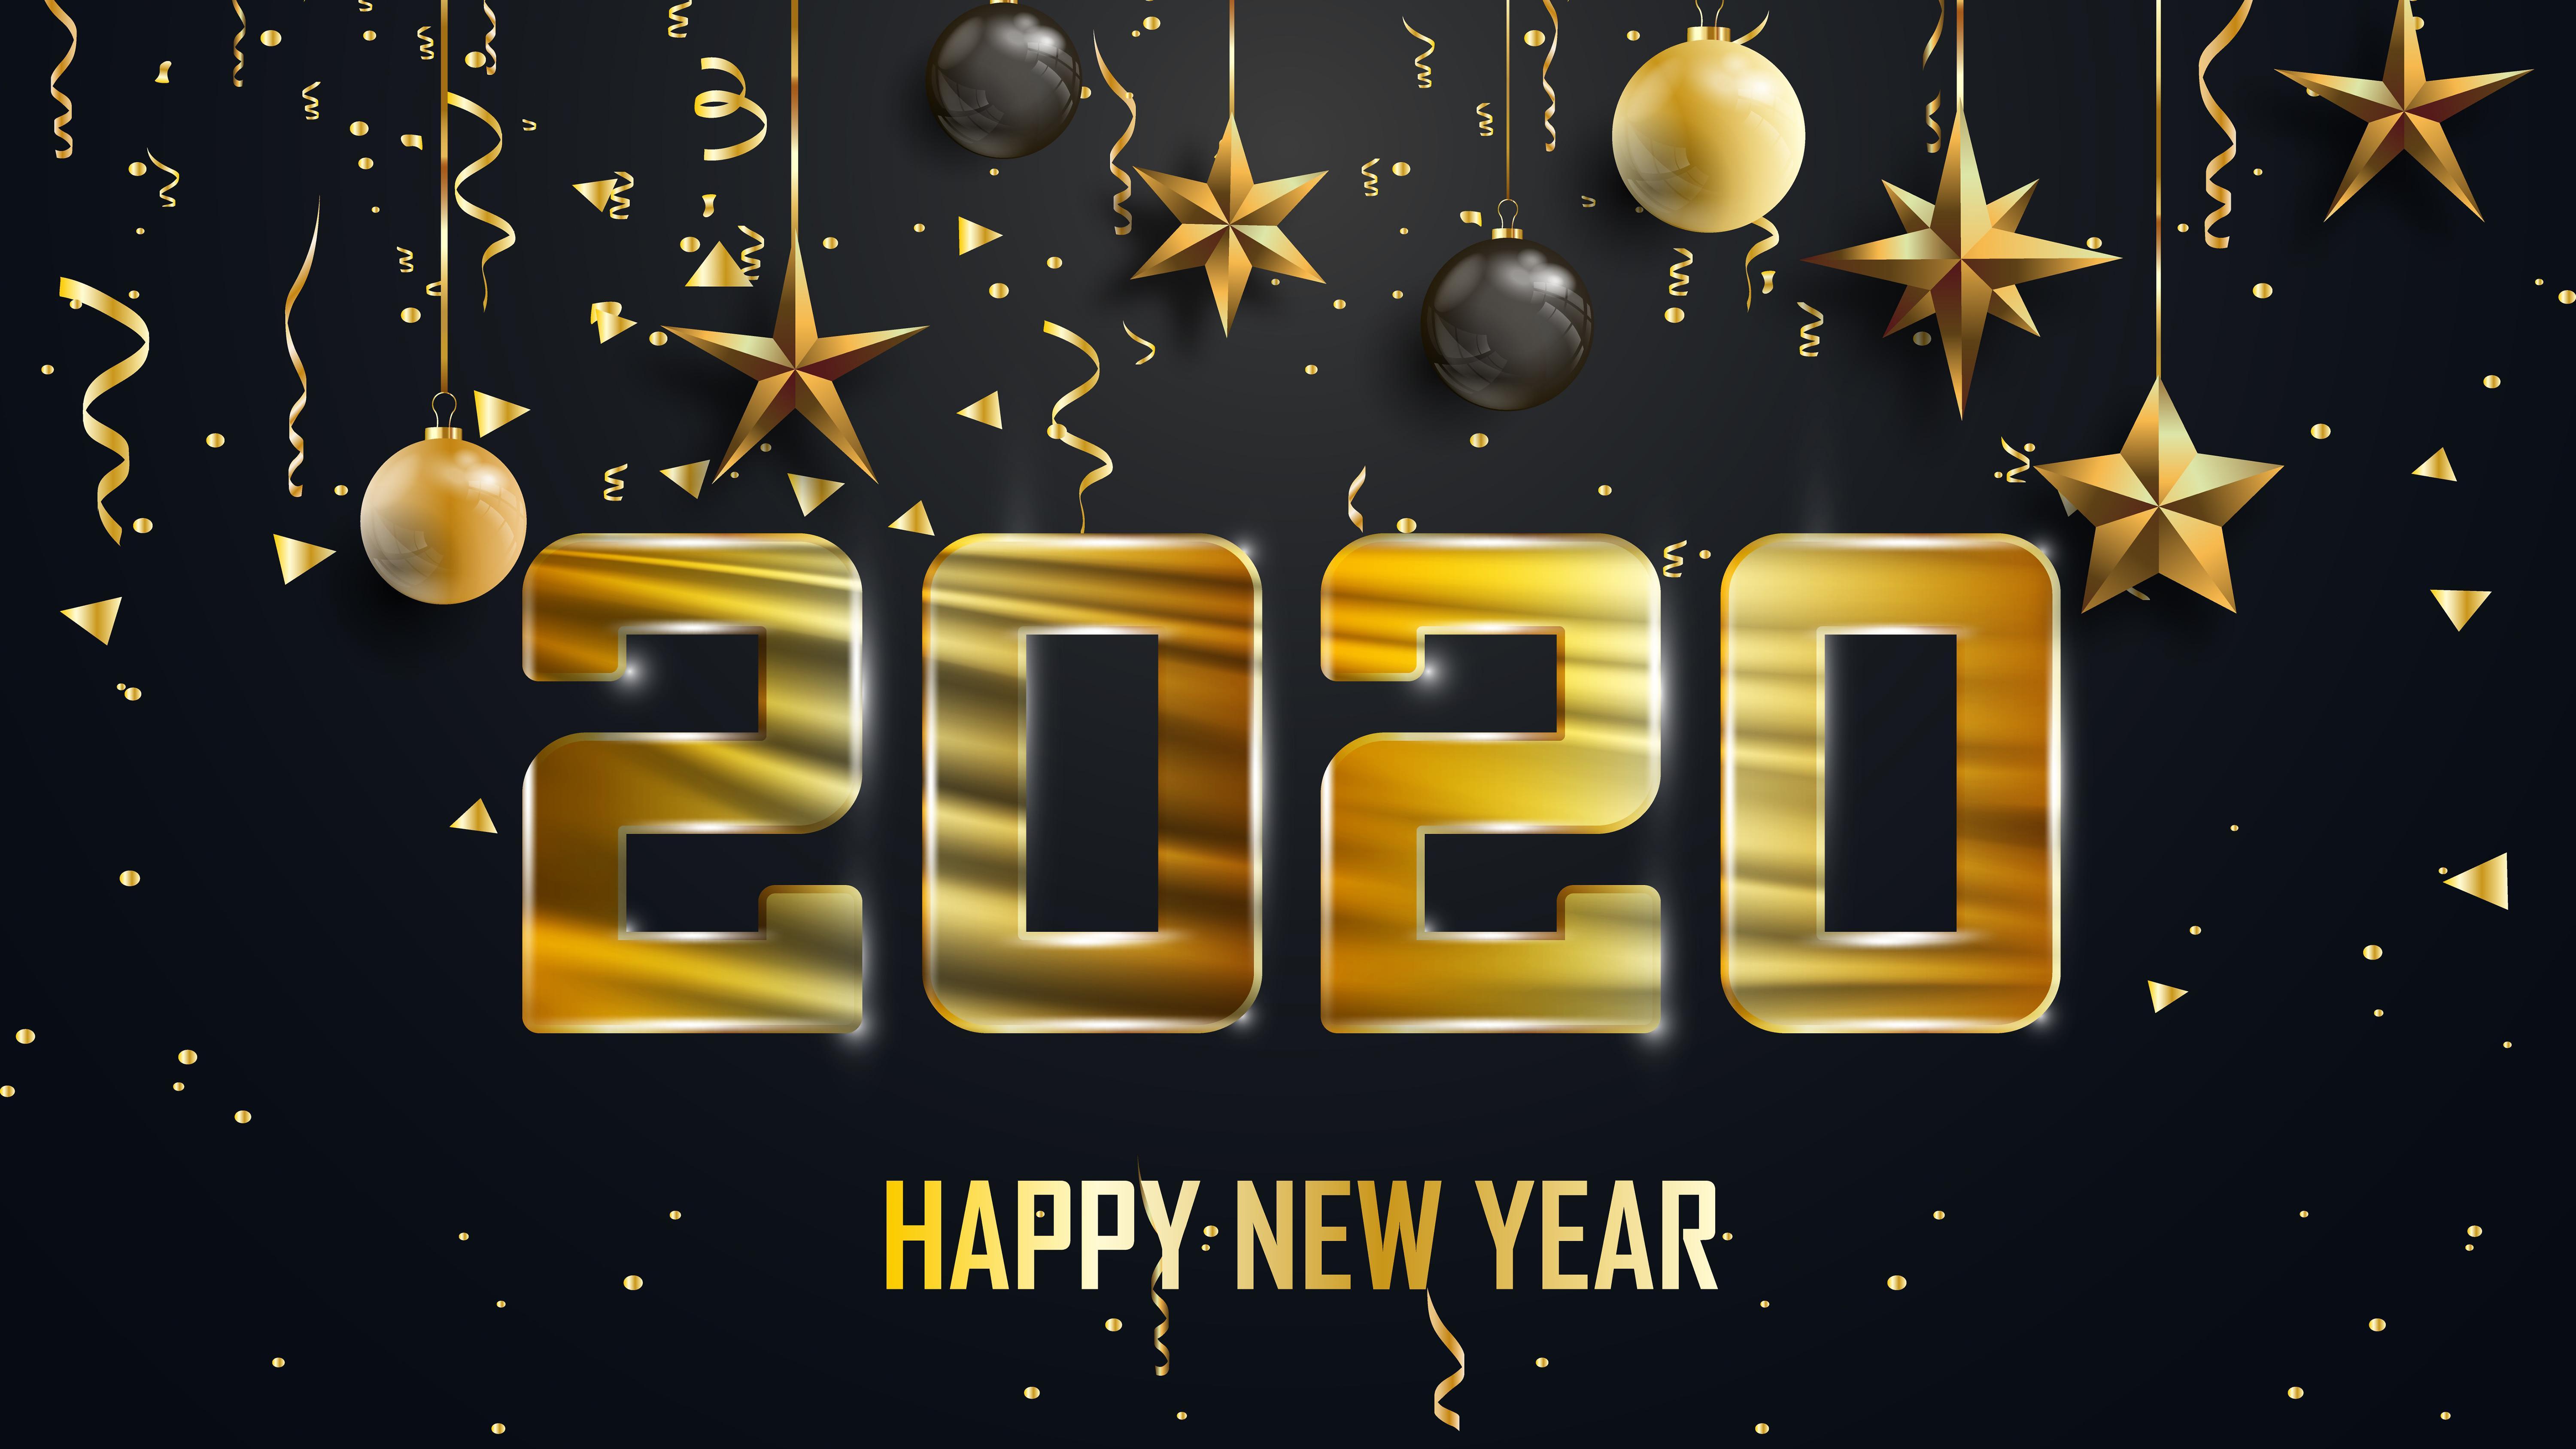 2020 New Year Ultra Hd Wallpapers - Wallpaper Cave